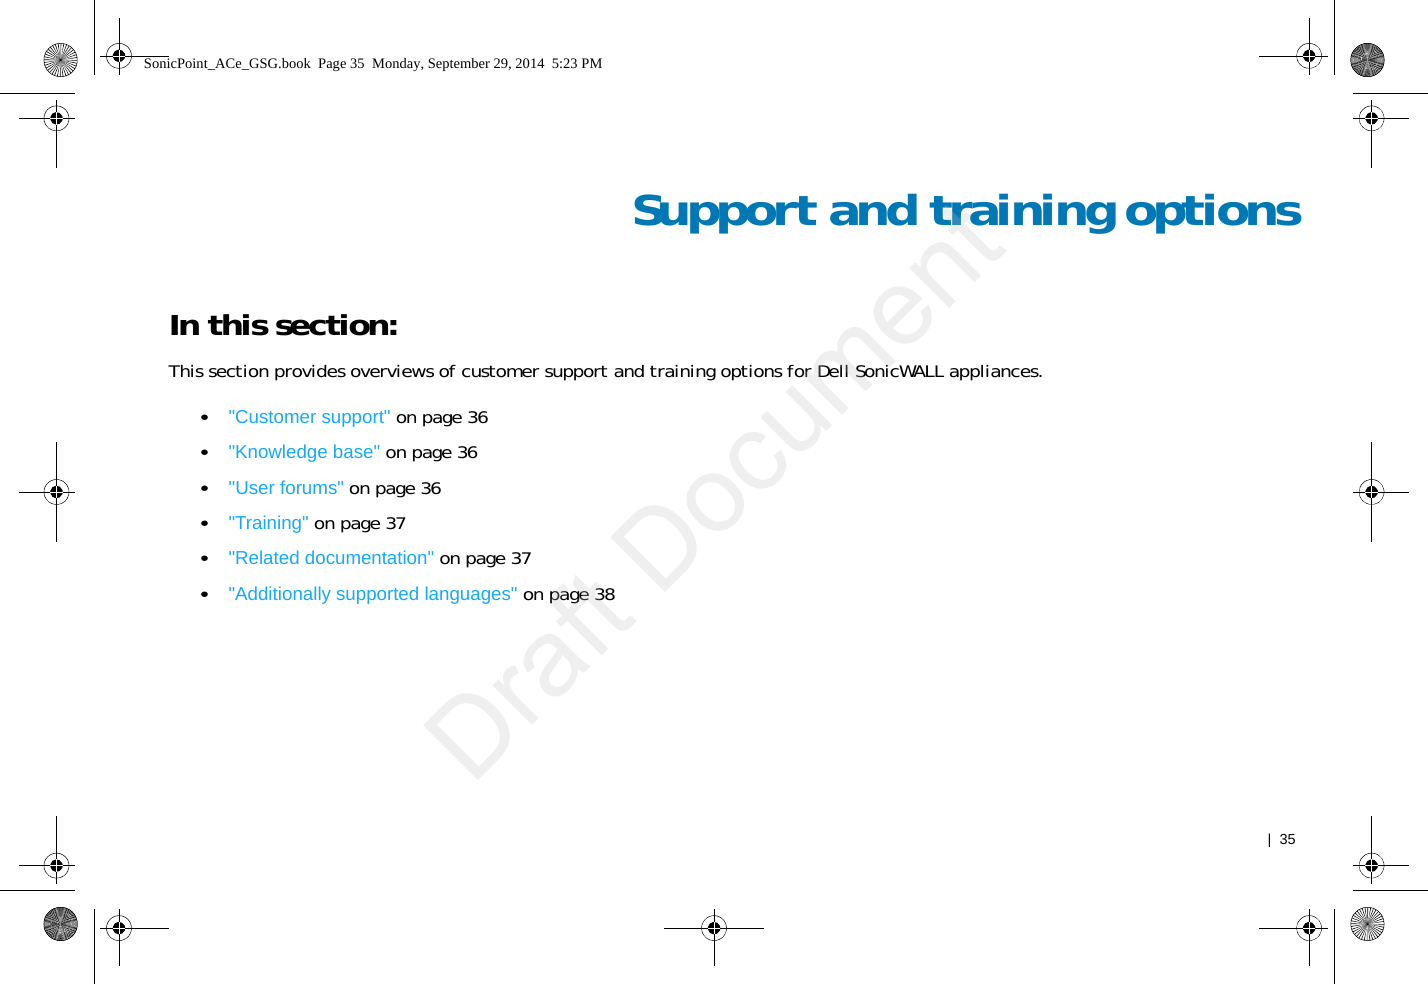   |  35Support and training optionsIn this section:This section provides overviews of customer support and training options for Dell SonicWALL appliances.•&quot;Customer support&quot; on page 36•&quot;Knowledge base&quot; on page 36•&quot;User forums&quot; on page 36•&quot;Training&quot; on page 37•&quot;Related documentation&quot; on page 37•&quot;Additionally supported languages&quot; on page 38SonicPoint_ACe_GSG.book  Page 35  Monday, September 29, 2014  5:23 PMDraft Document